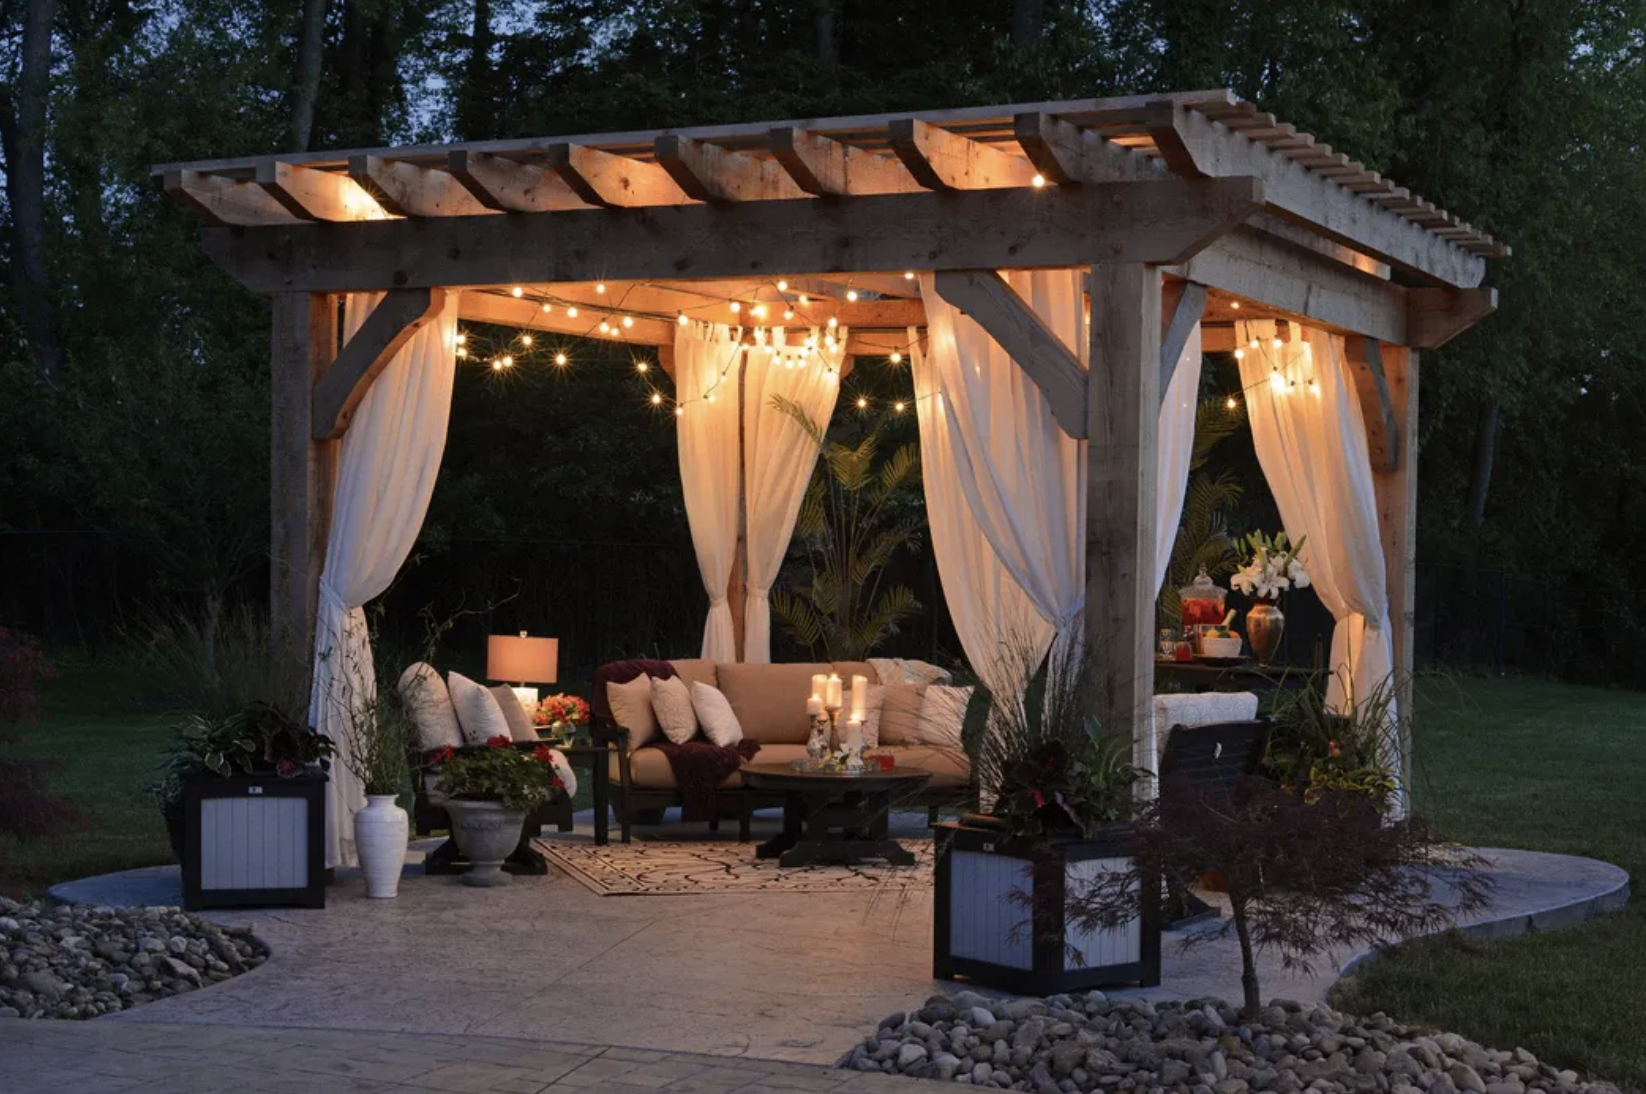 8 Ways to Ensure Your Outdoor Space Remains Useable Regardless of the Weather